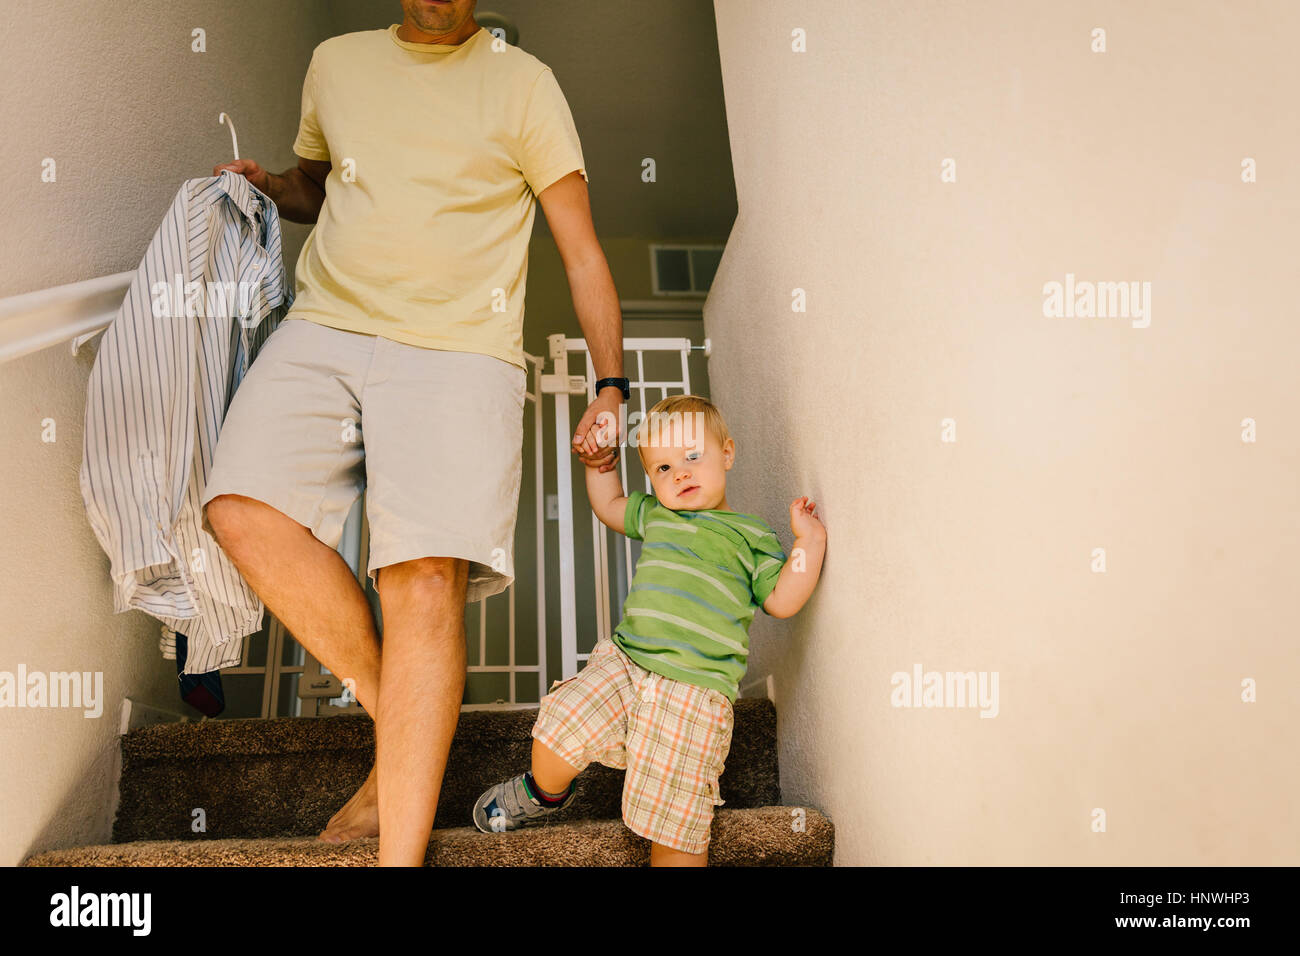 Father and young son walking downstairs, holding hands, father holding shirt on hanger Stock Photo